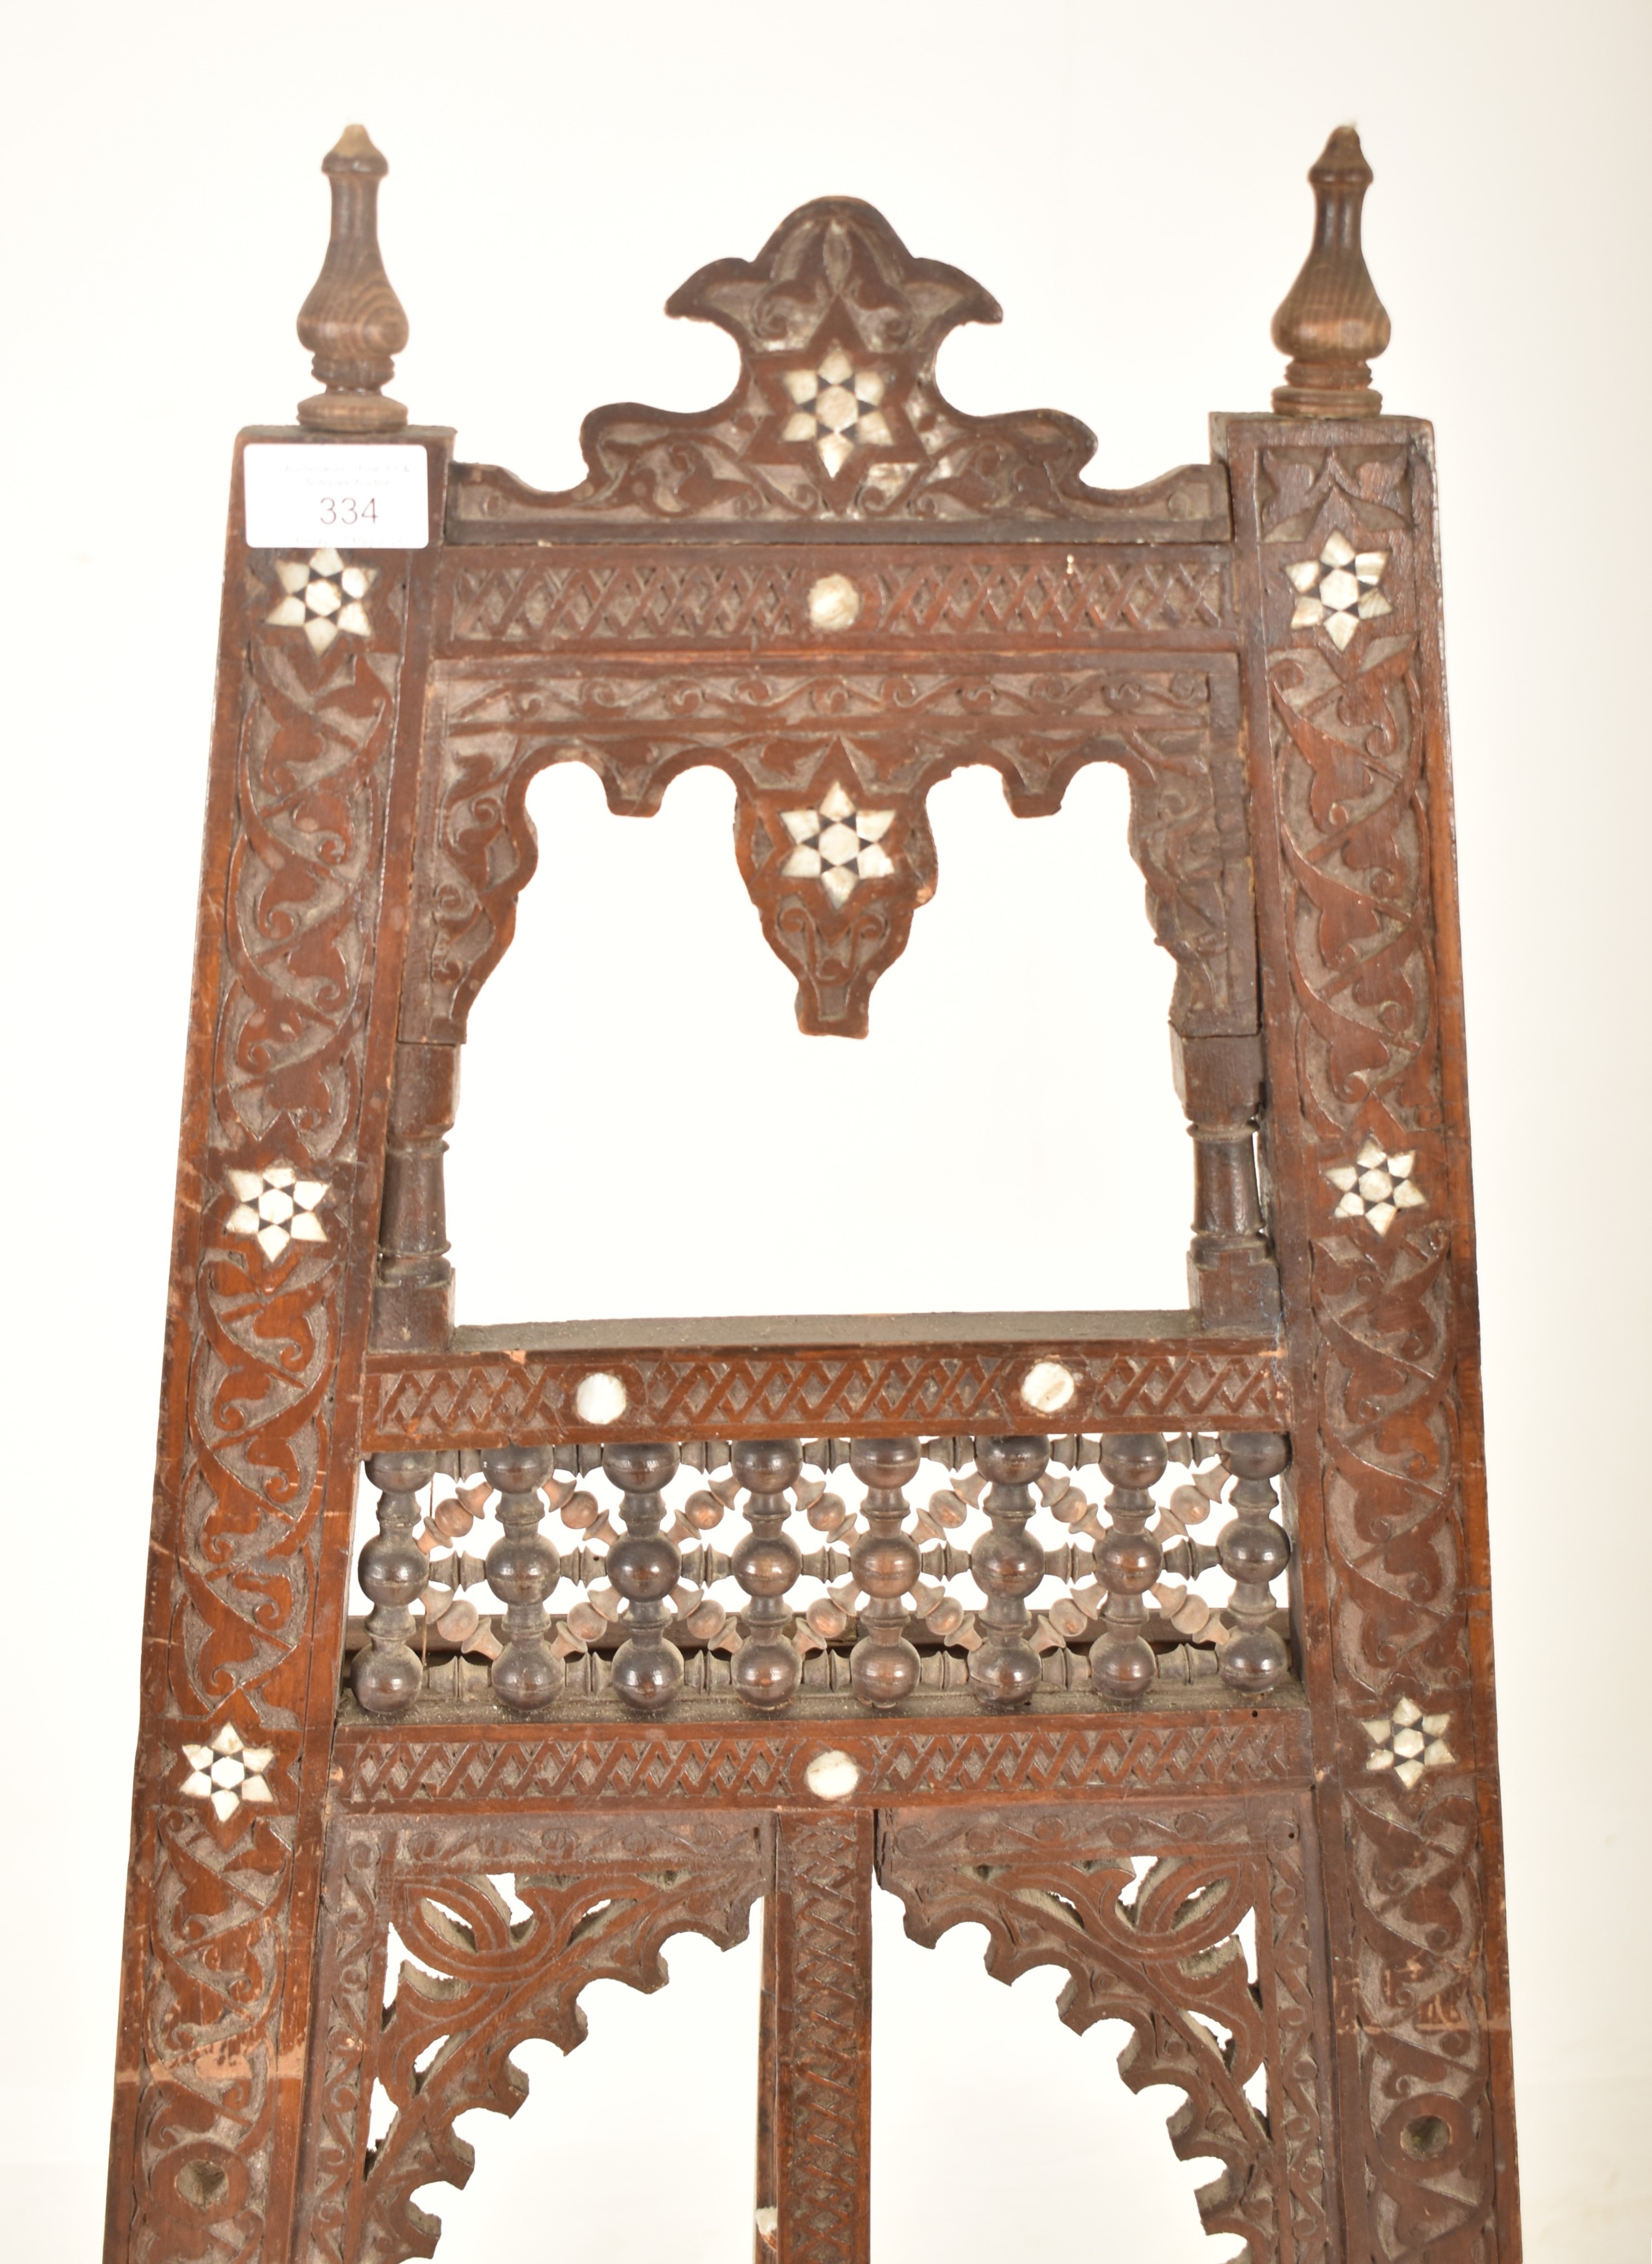 MOORISH 19TH CENTURY CARVED WOOD & MOTHER OF PEARL EASEL - Image 2 of 5